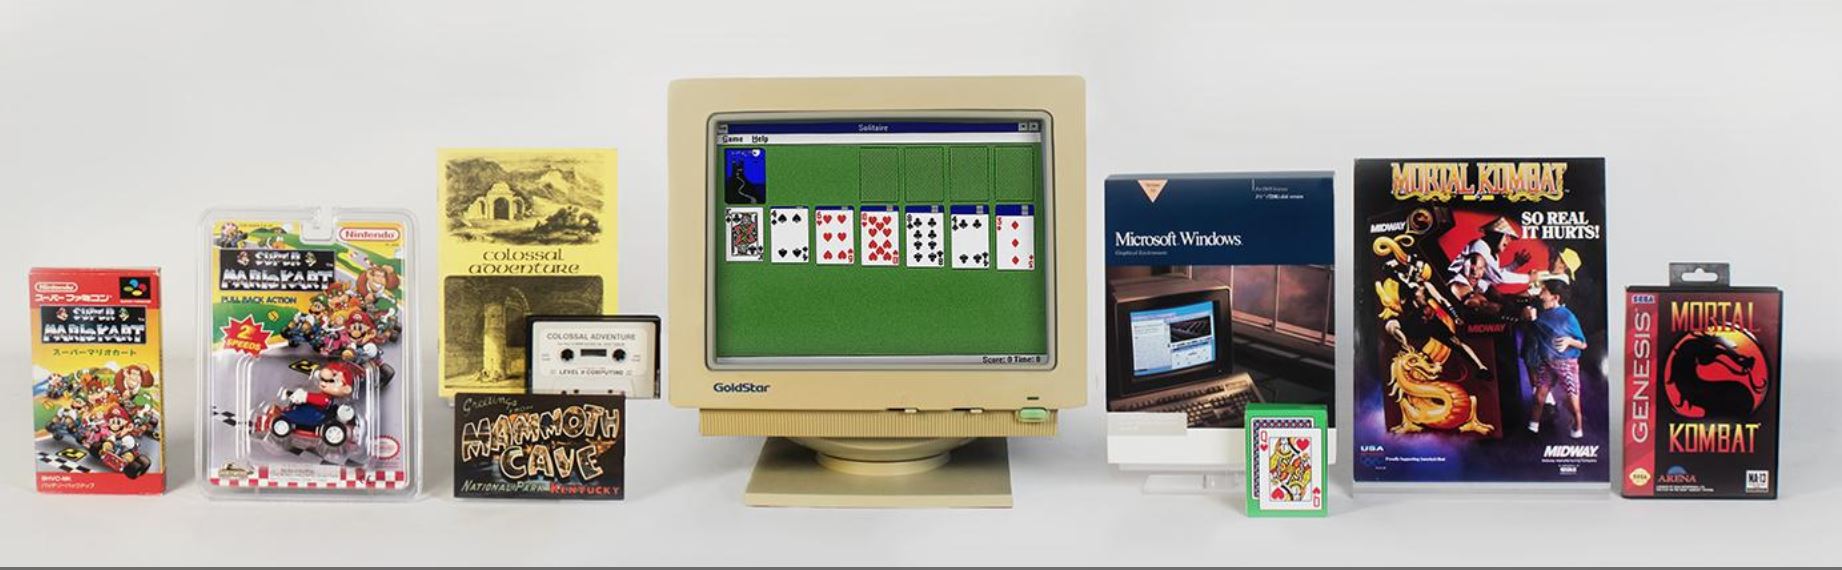 World Video Game Hall of Fame, Mortal Kombat, Microsoft Solitaire, Colossal Cave Adventure, GamersRD